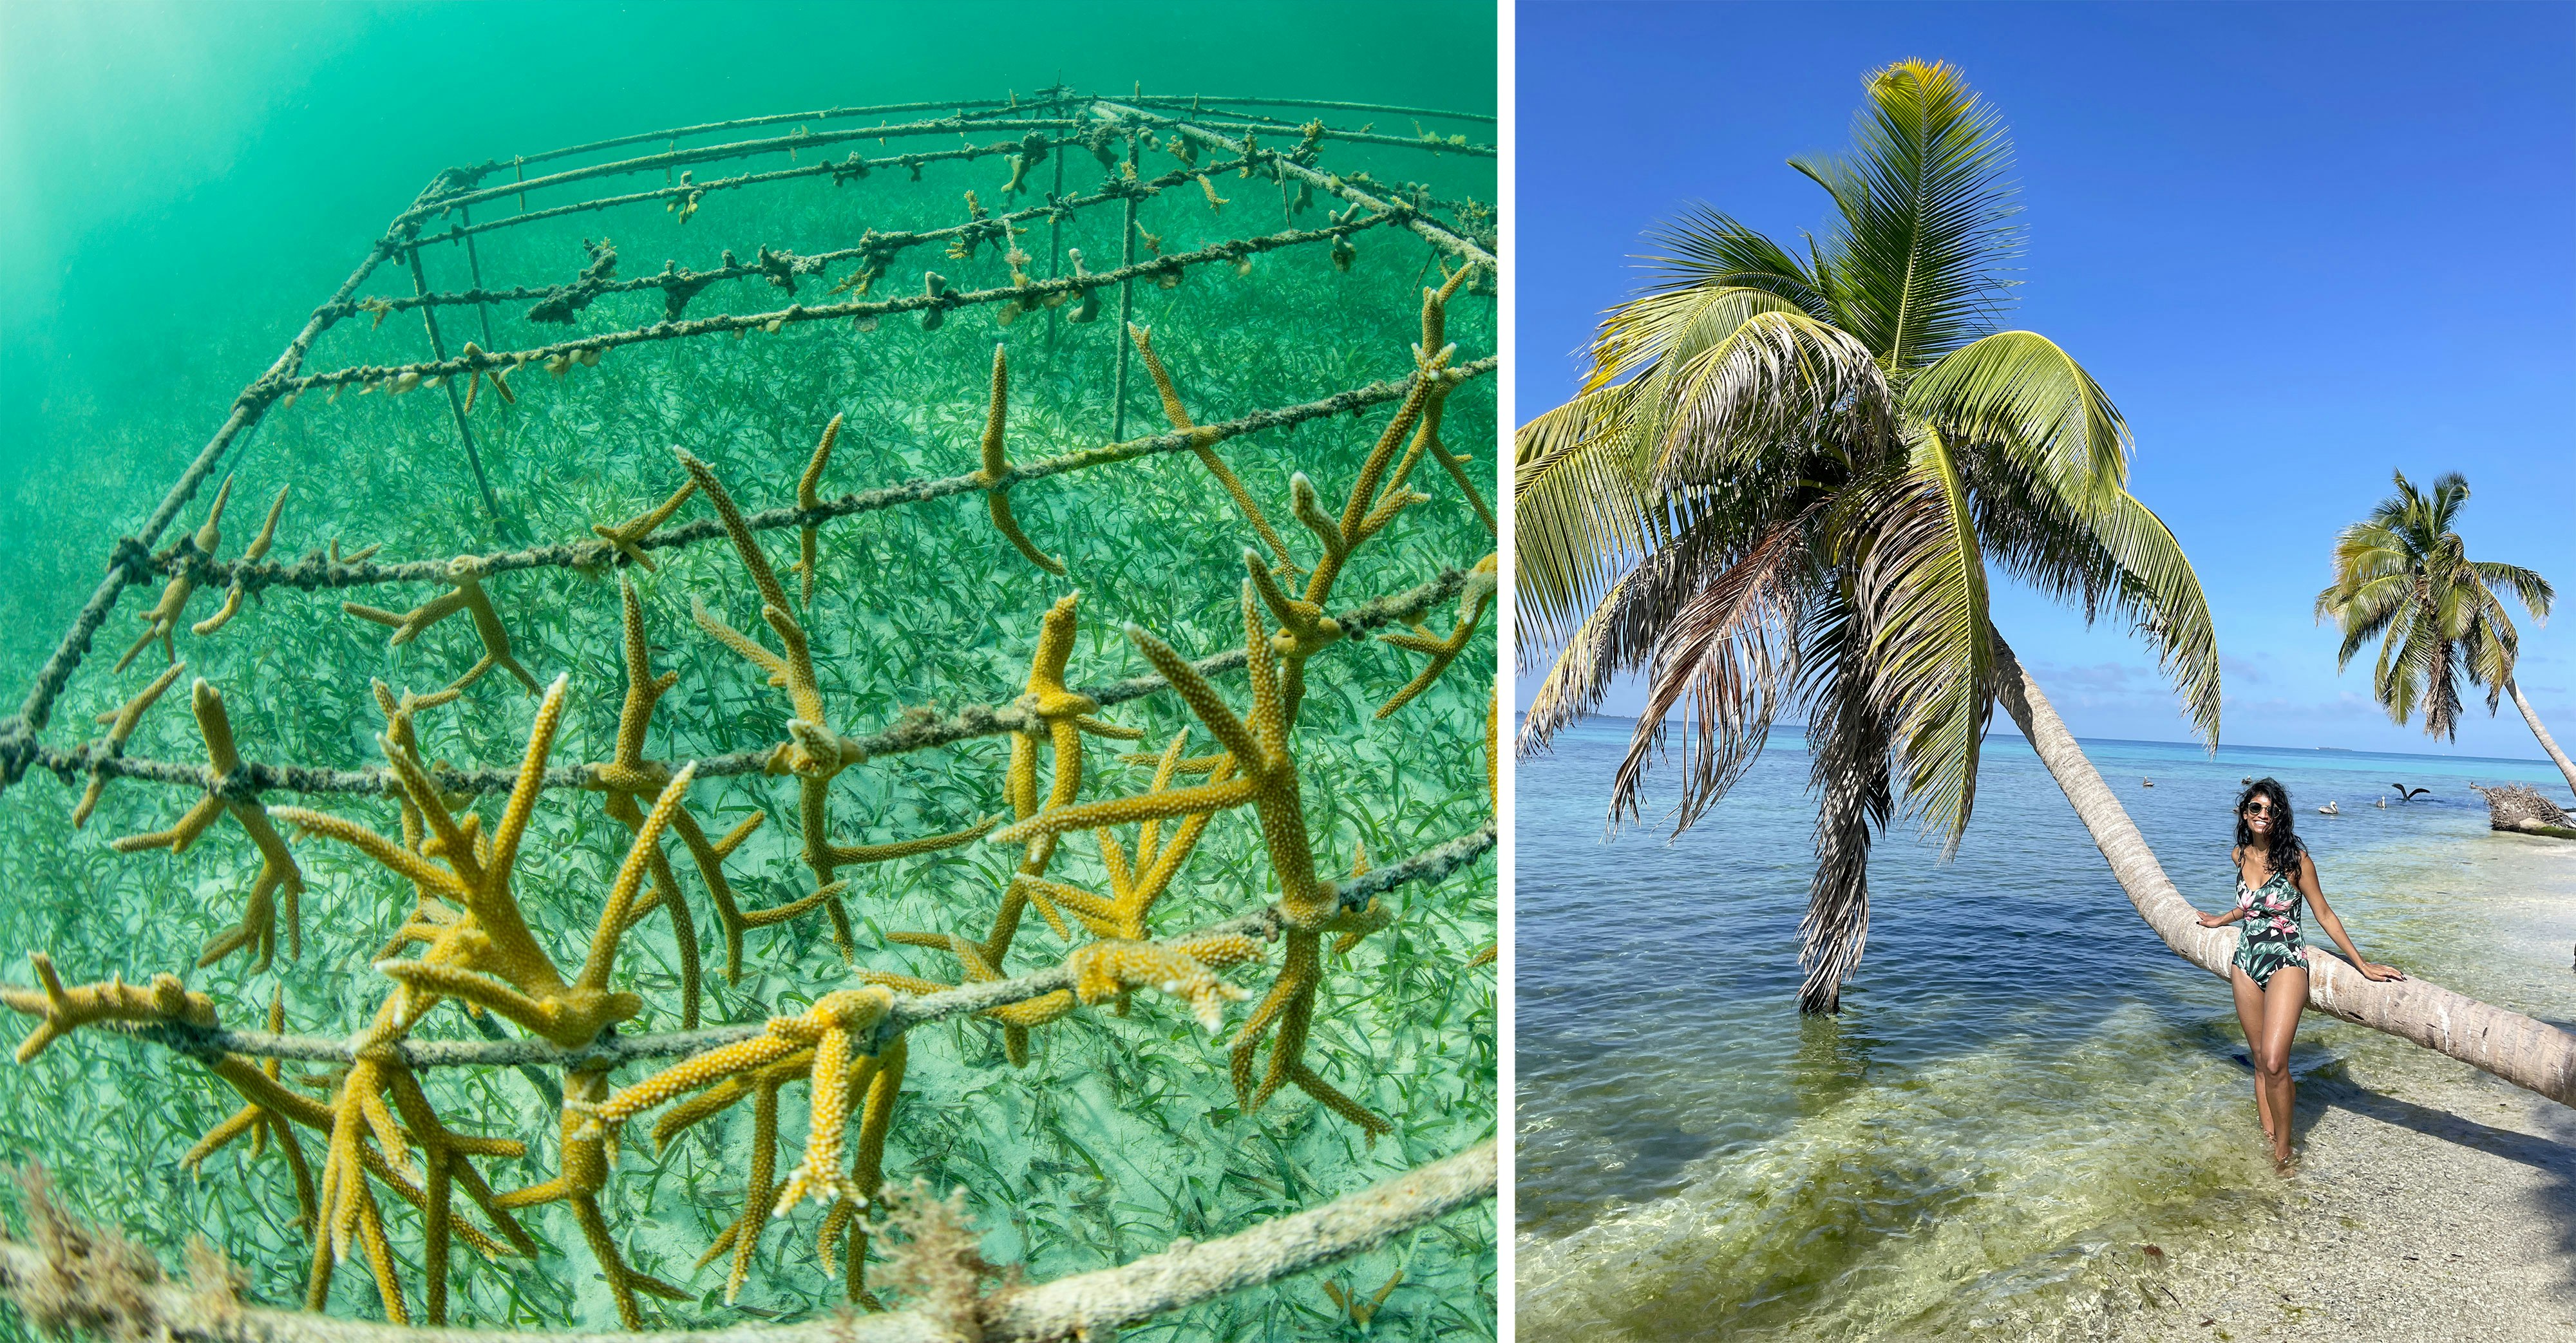 Left: coral regrowth project with coral strands on an underwater artificial frame;  Right: woman in bikini on a beach